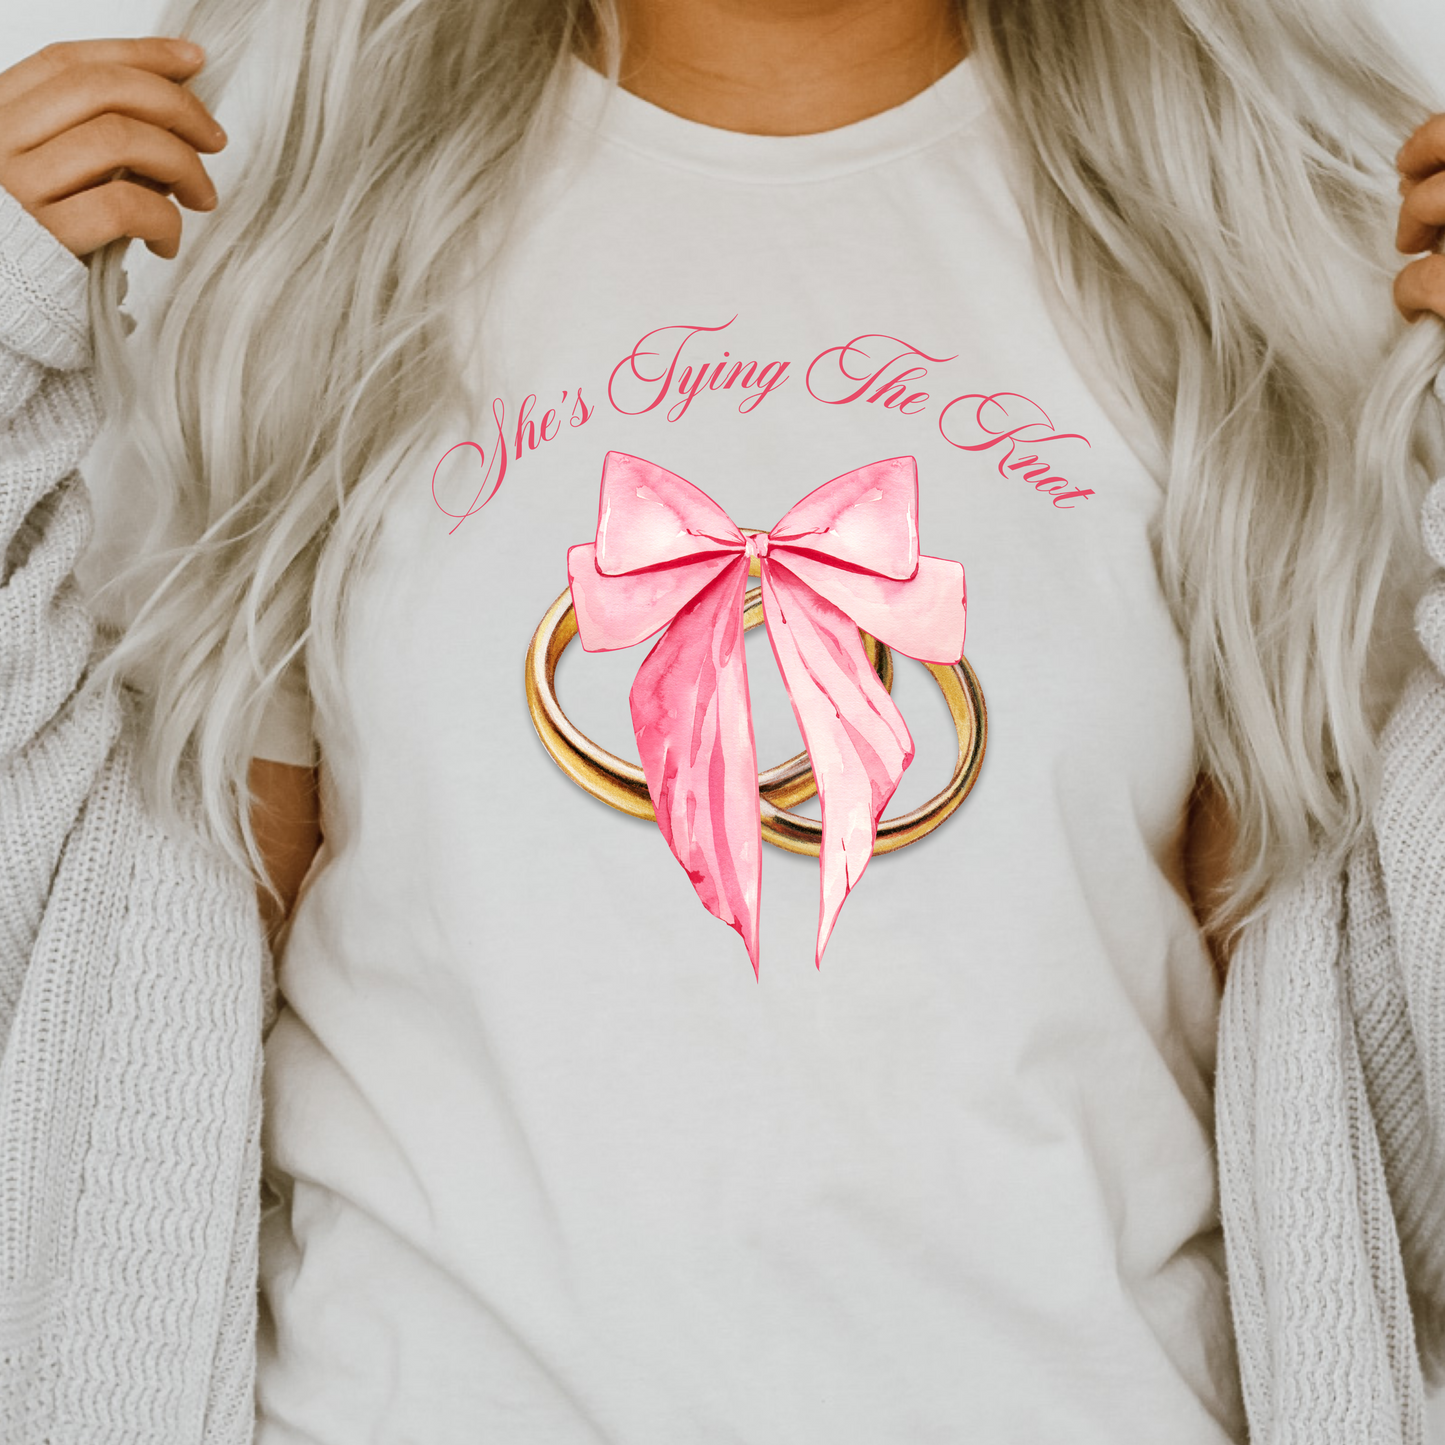 She's Tying the Knot T-Shirt